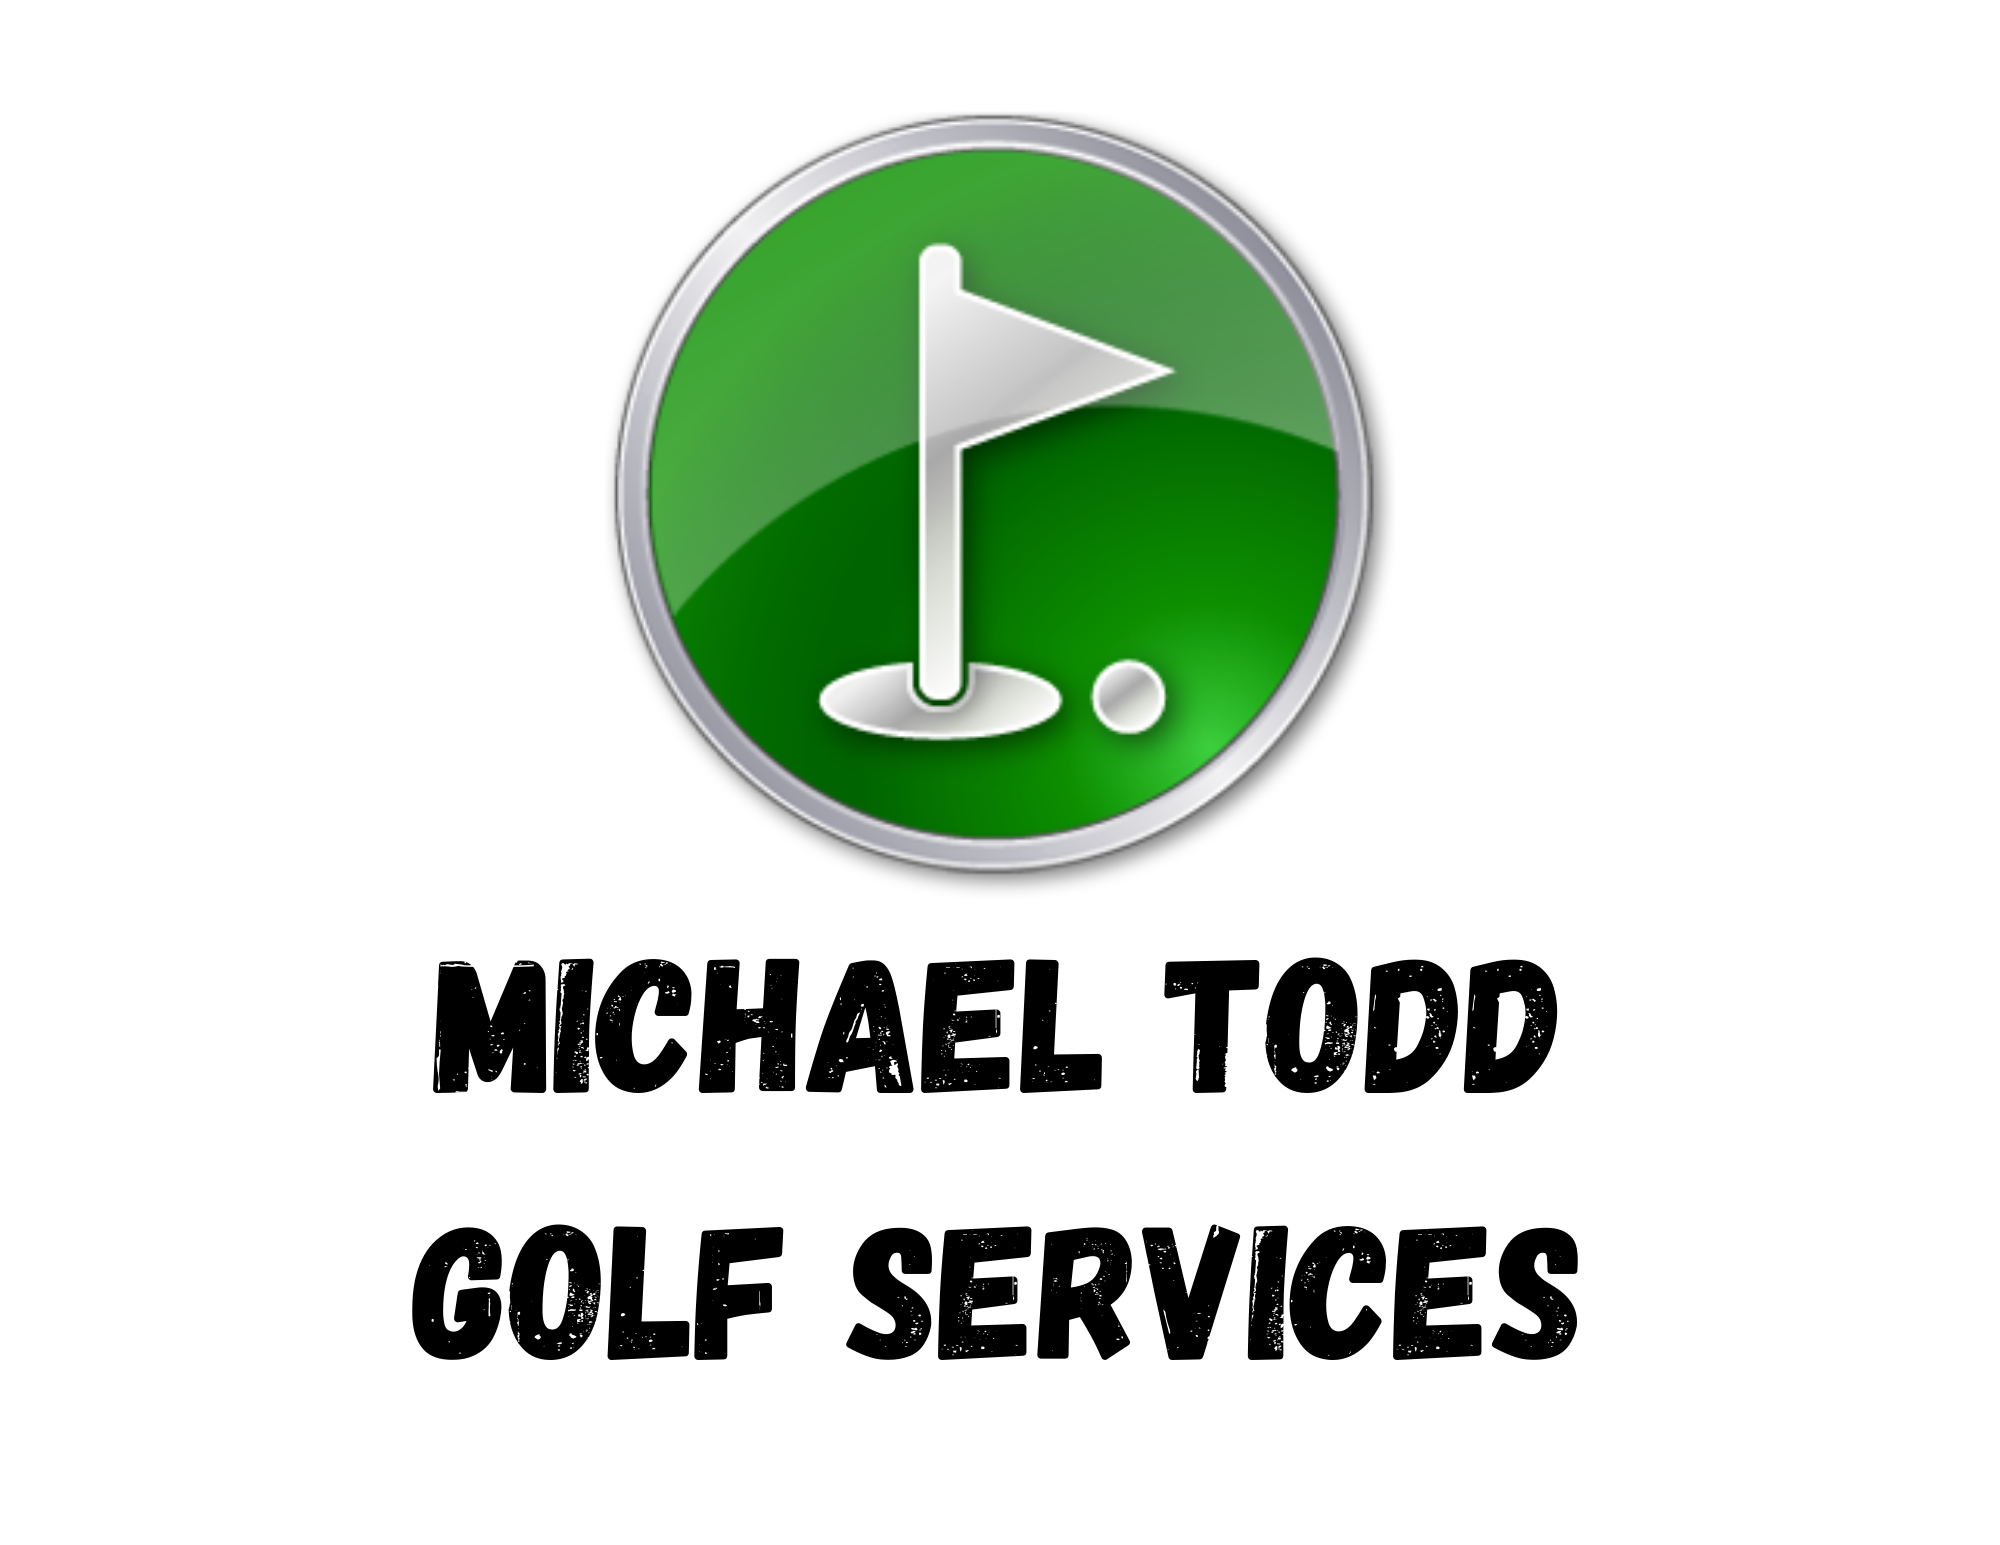 Michael Todd Golf Services